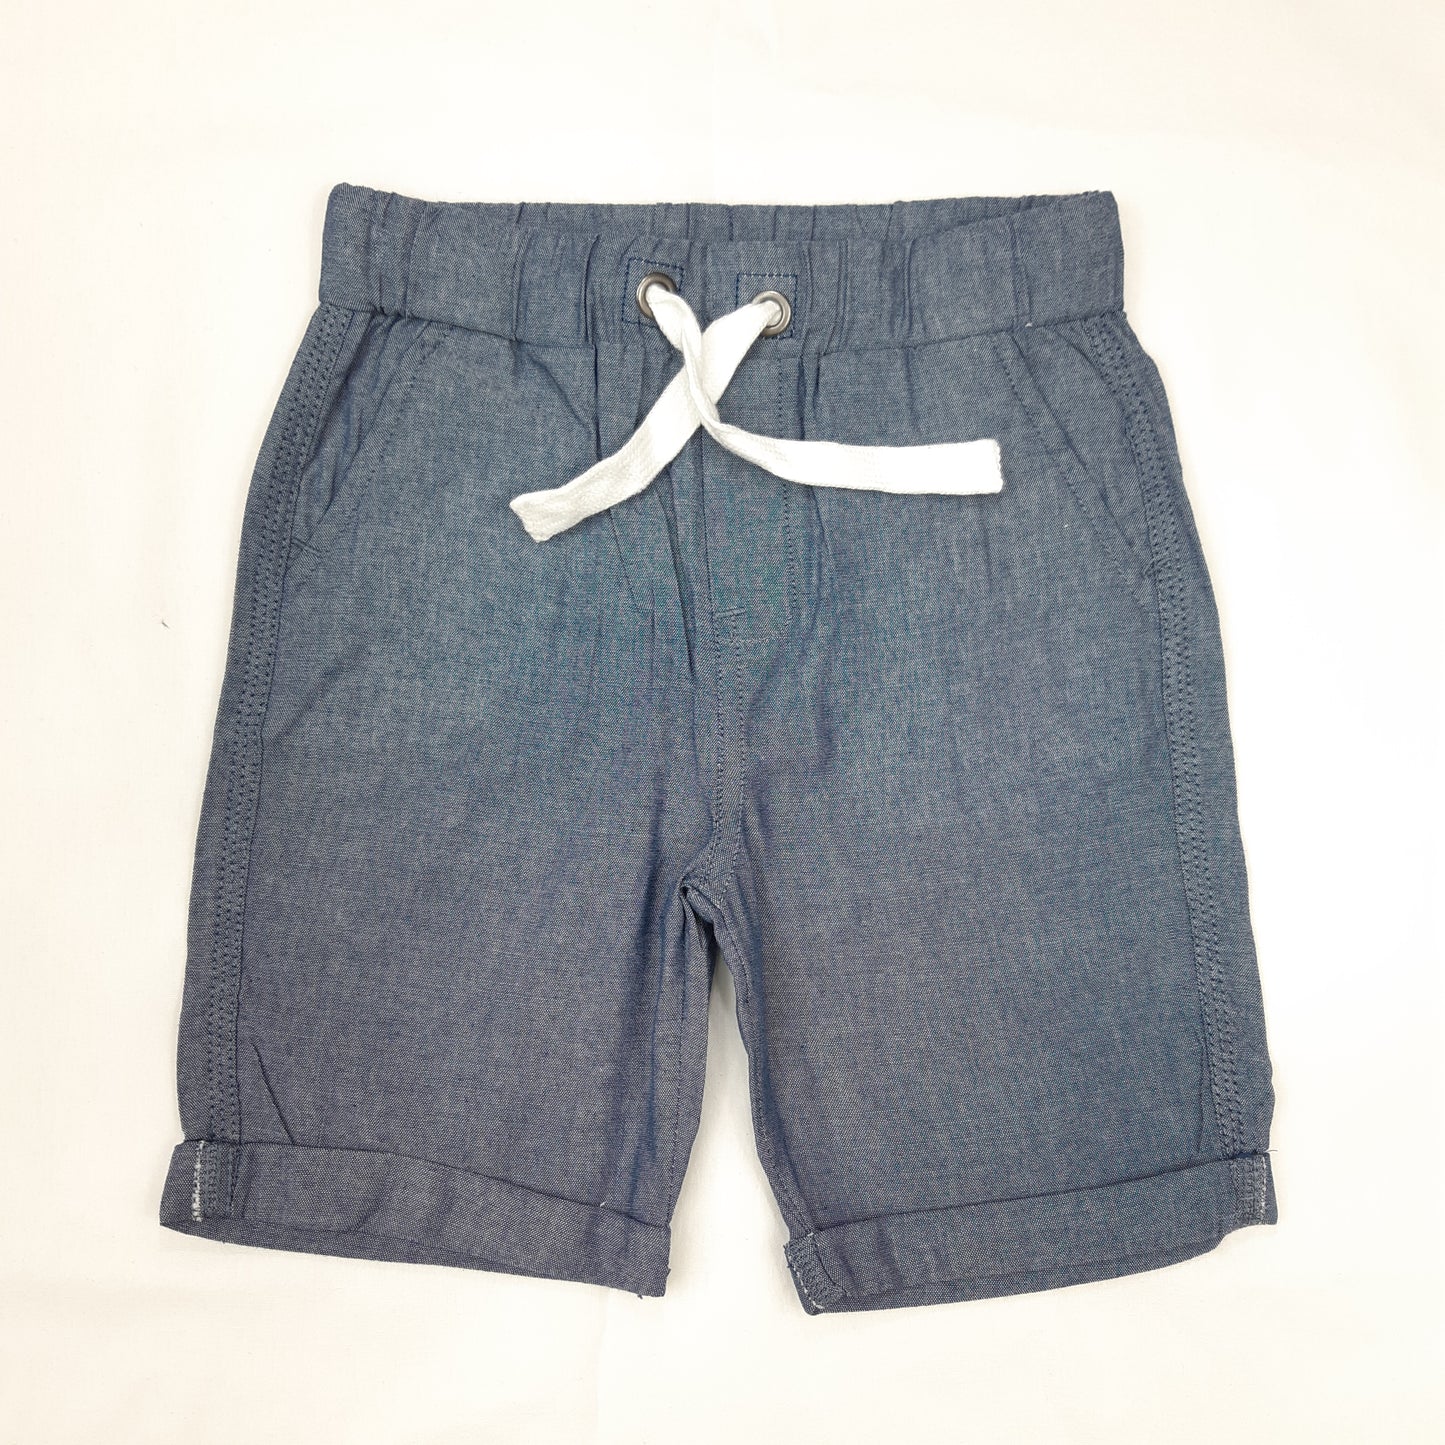 Chambray Bermudas 7 to 14 years - mid ss21